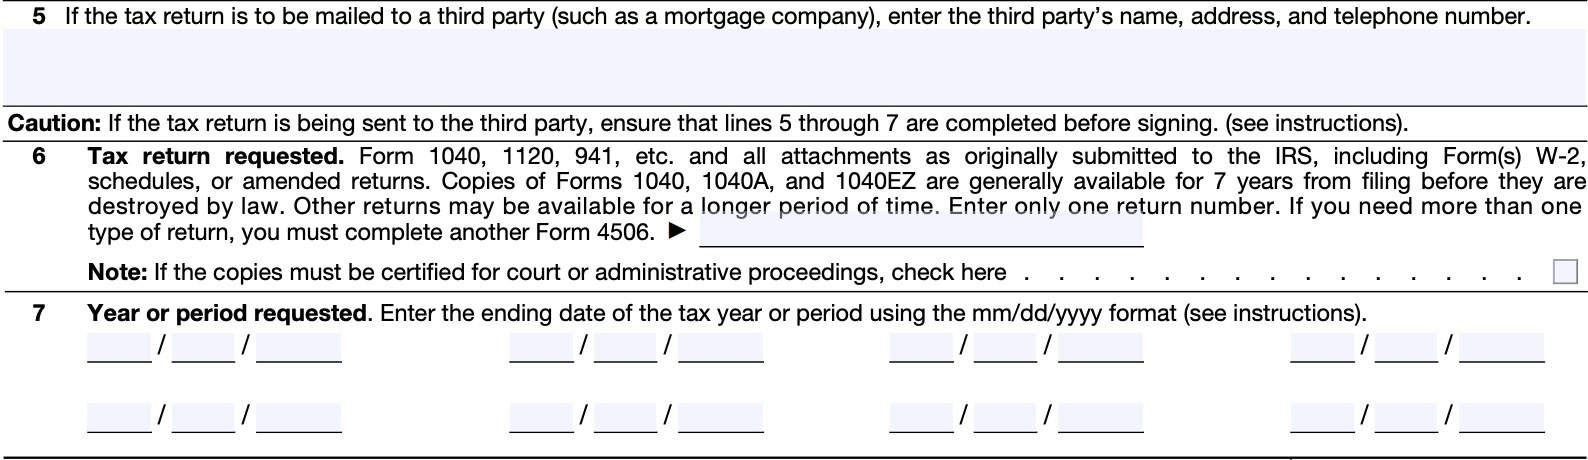 irs form 4506, lines 5-7